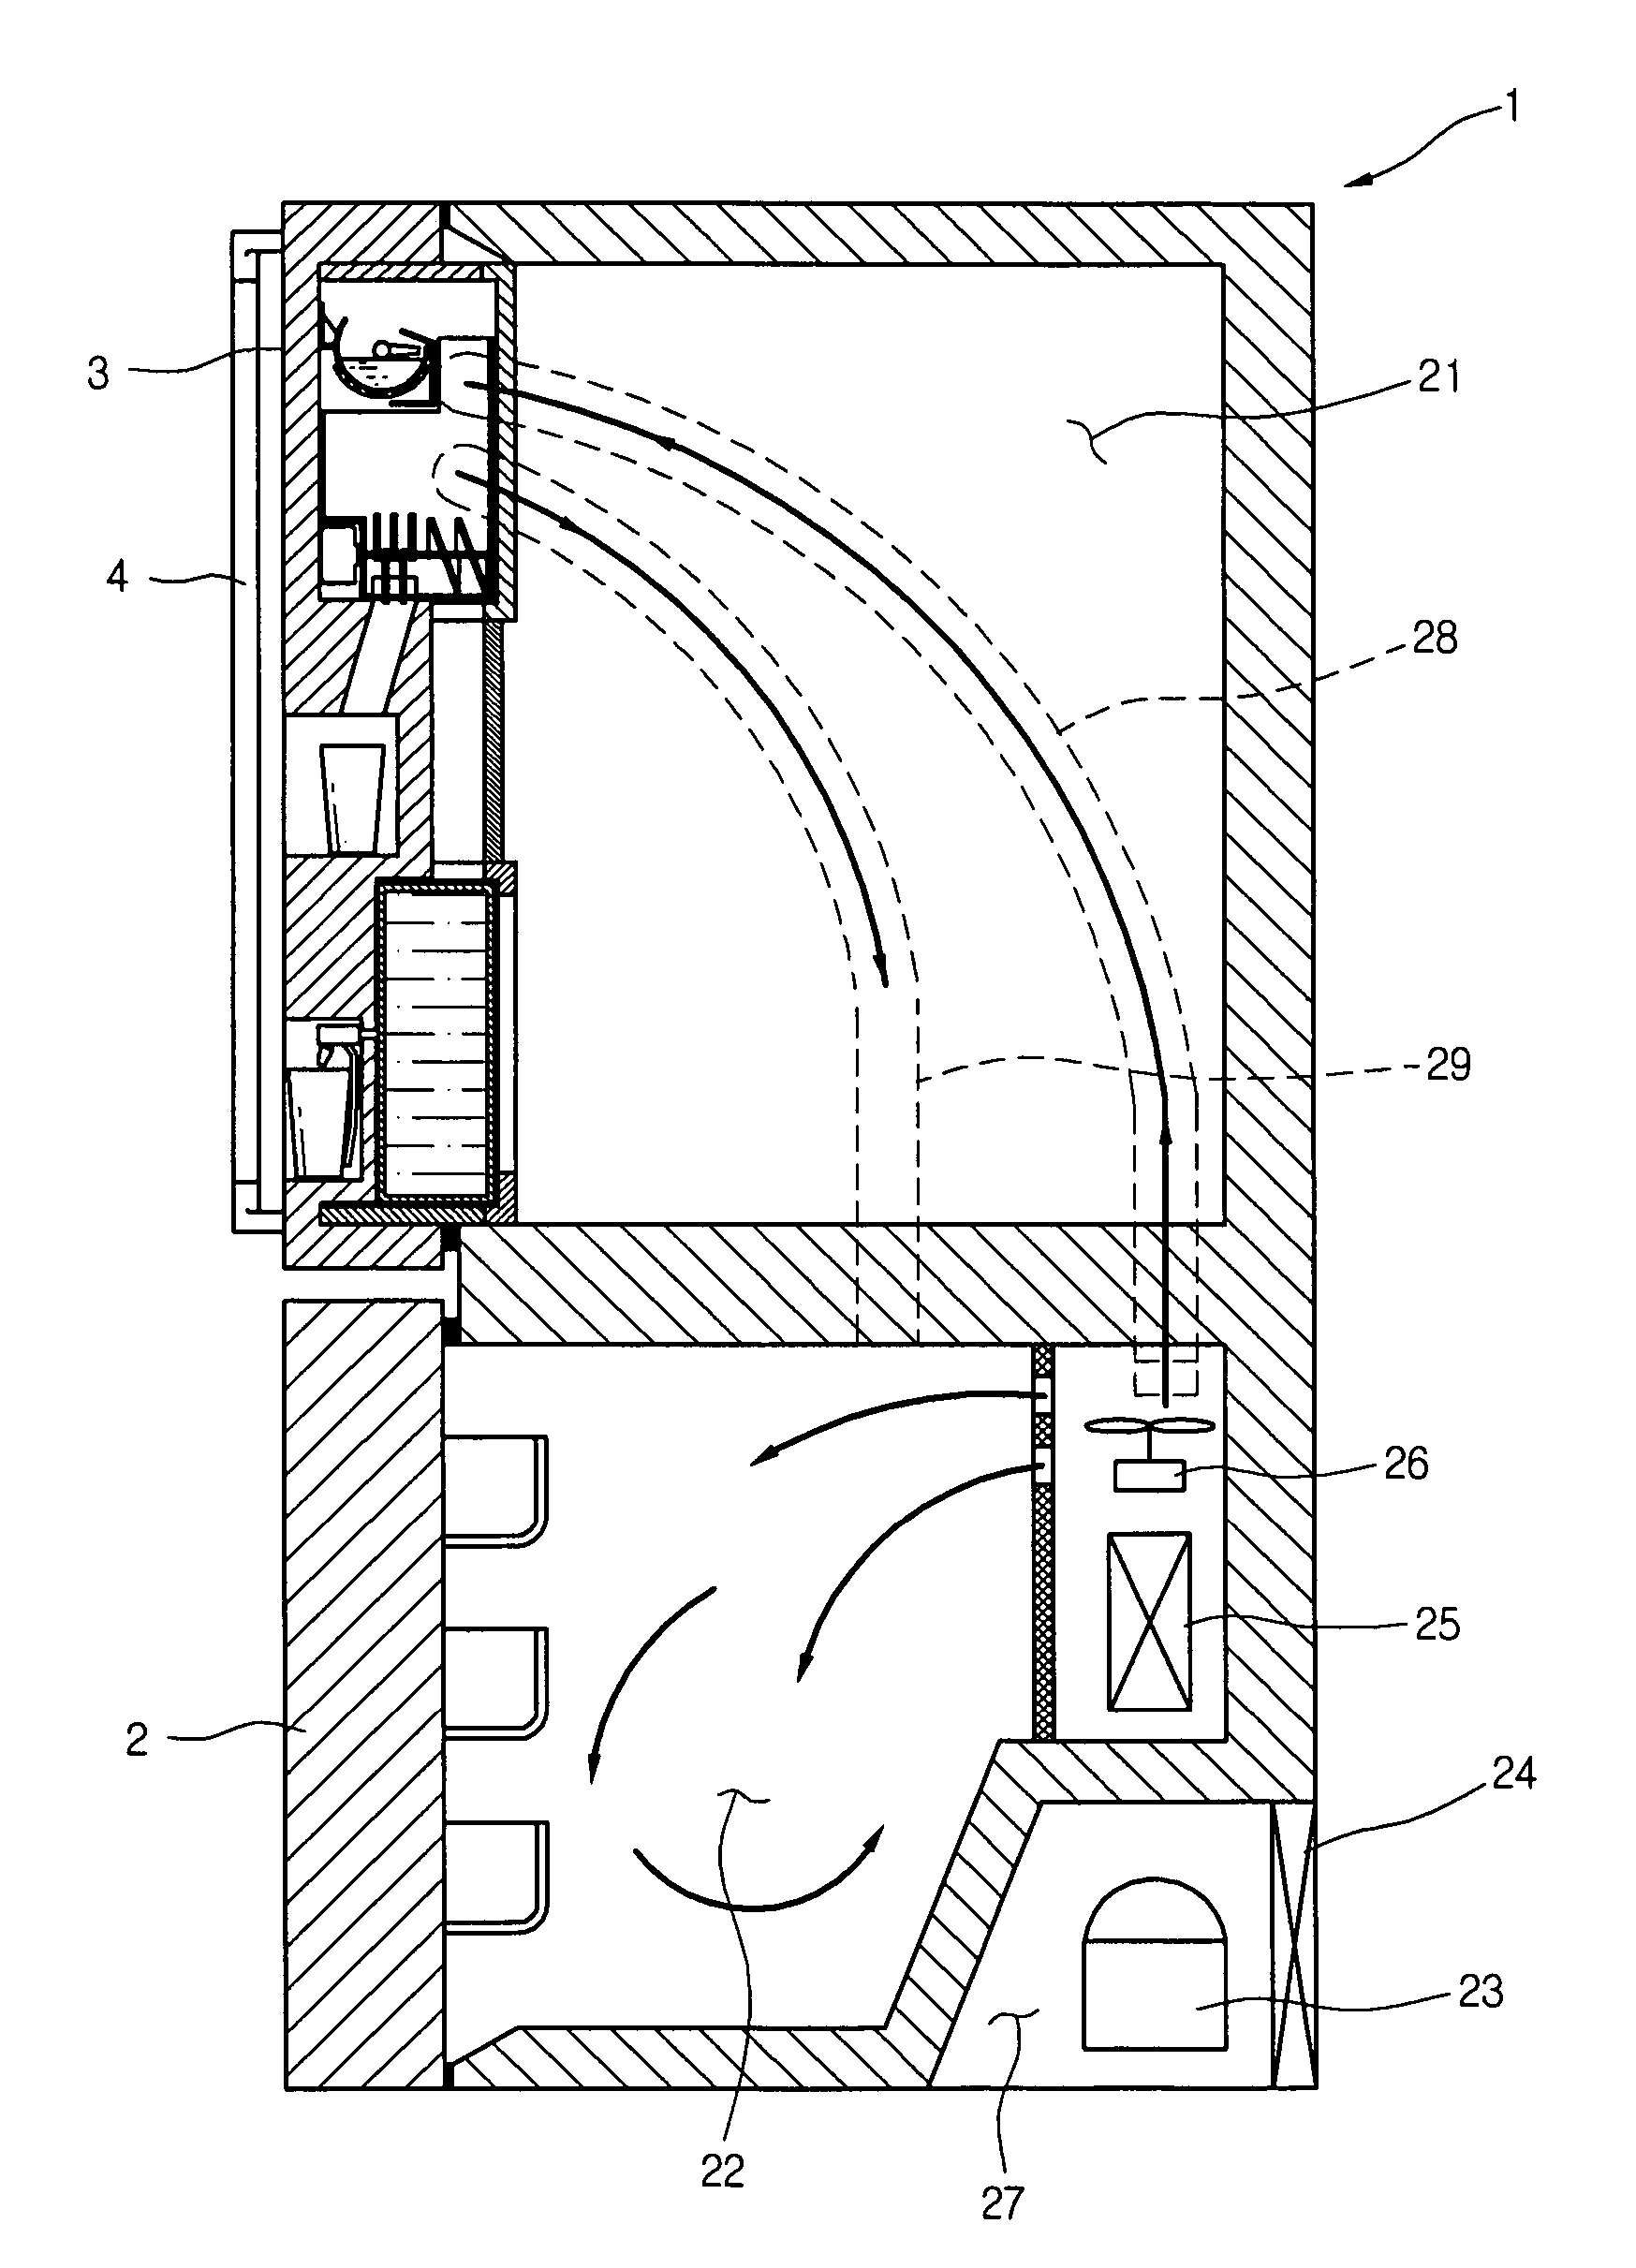 Cooling air flow passage of refrigerator